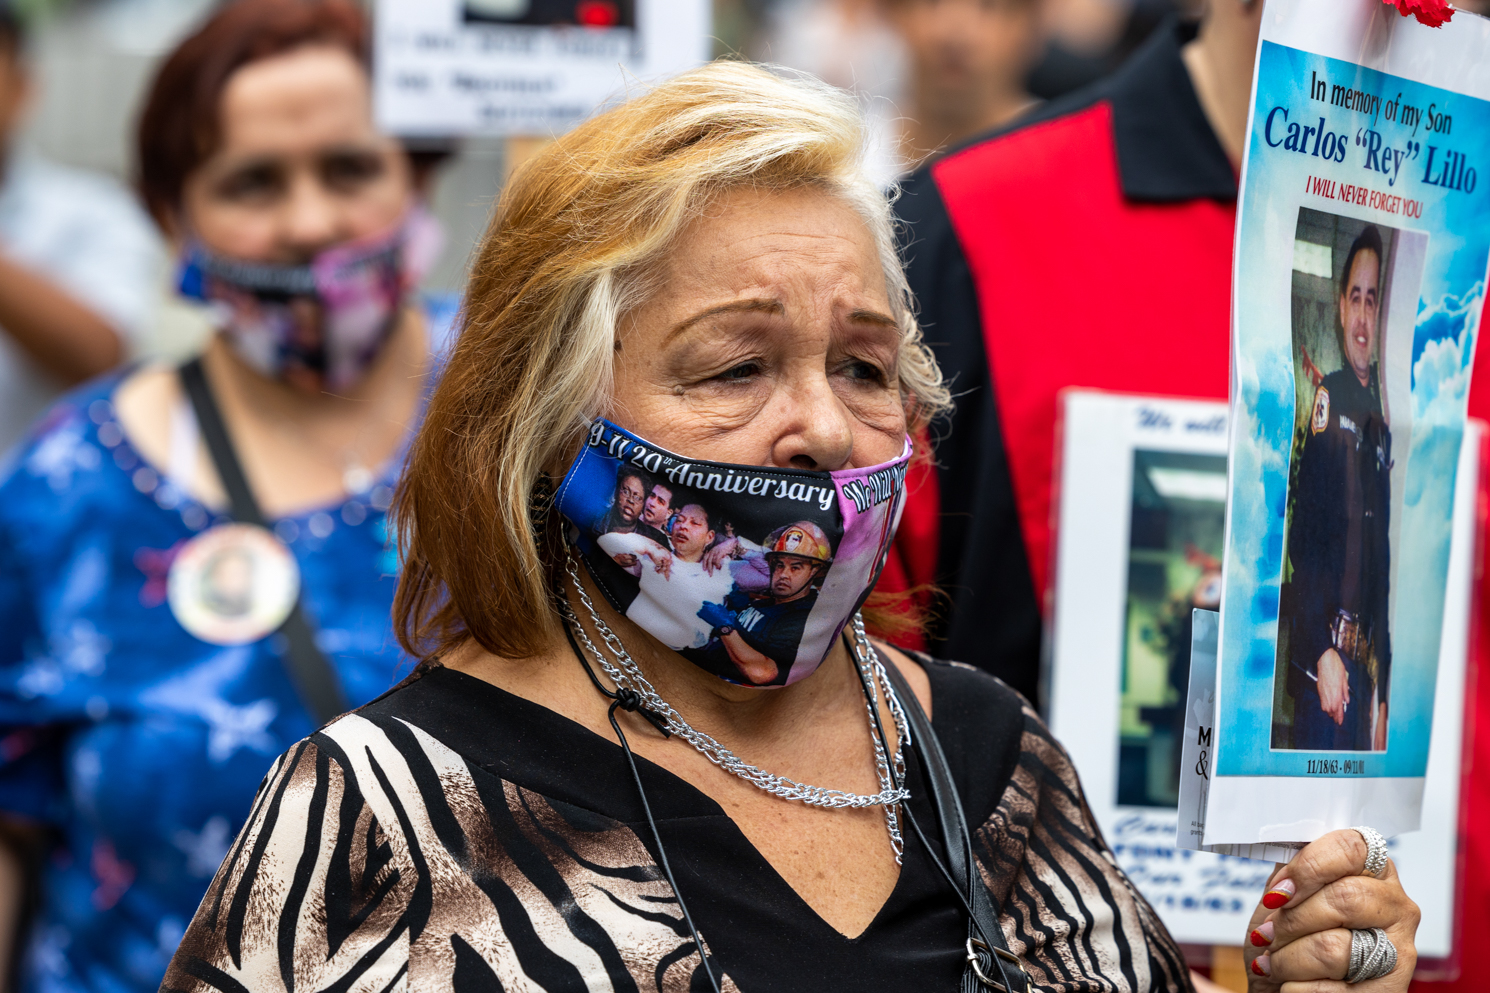 Mother of Carlos “Rey” Lillo, an officer who died during the Sept. 11 attacks, wears a Sept. 11 commemorative mask and holds a sign with a picture of her late son.